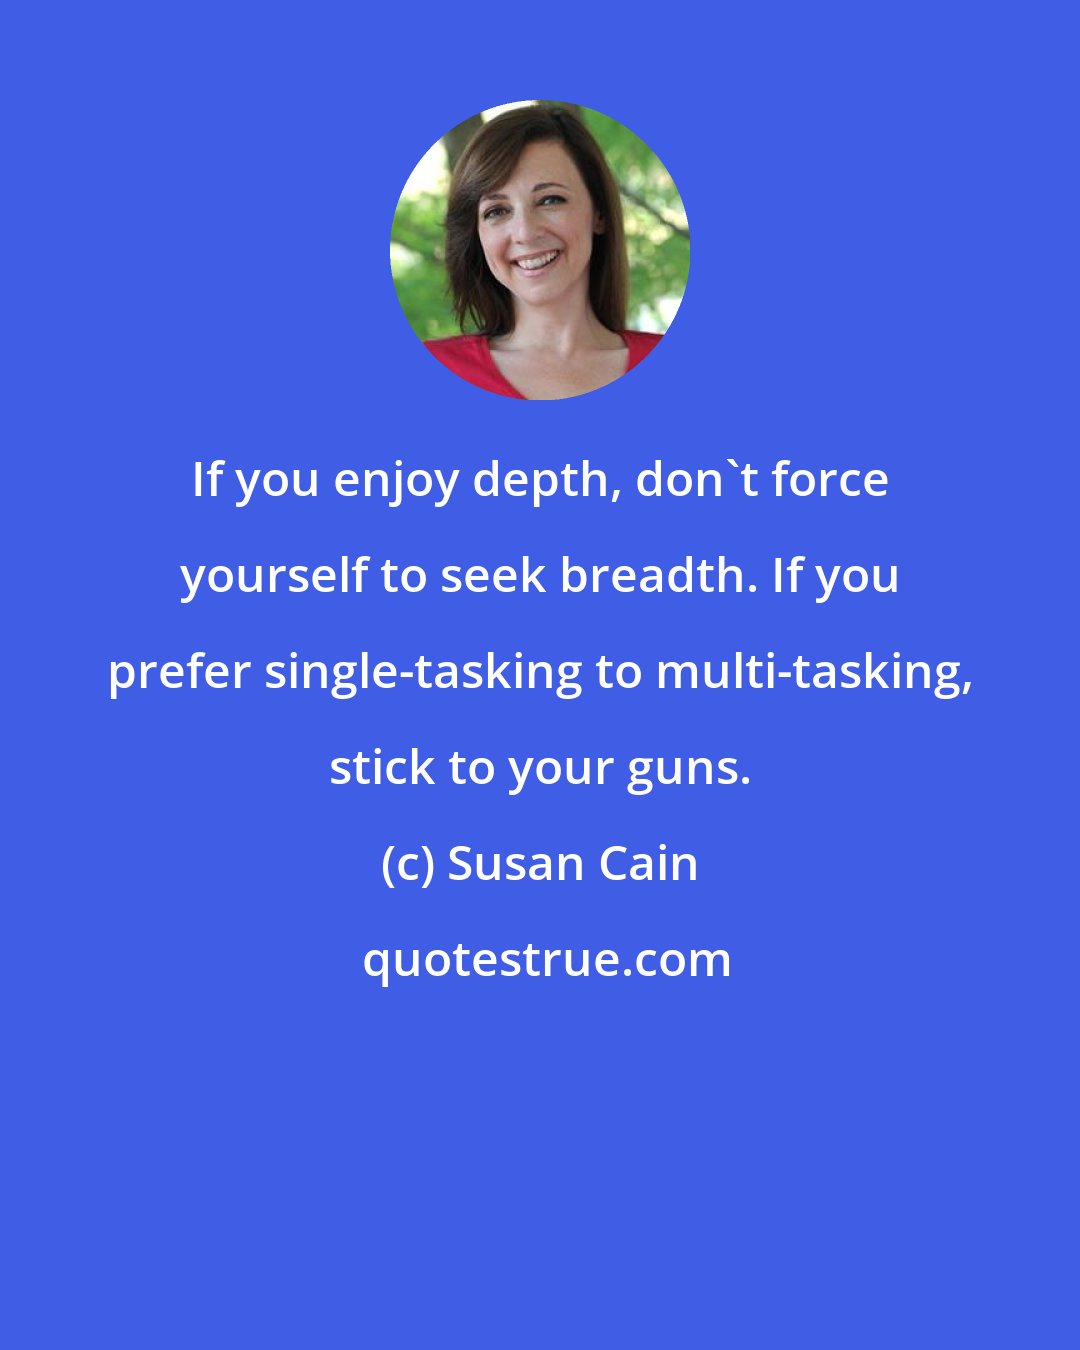 Susan Cain: If you enjoy depth, don't force yourself to seek breadth. If you prefer single-tasking to multi-tasking, stick to your guns.